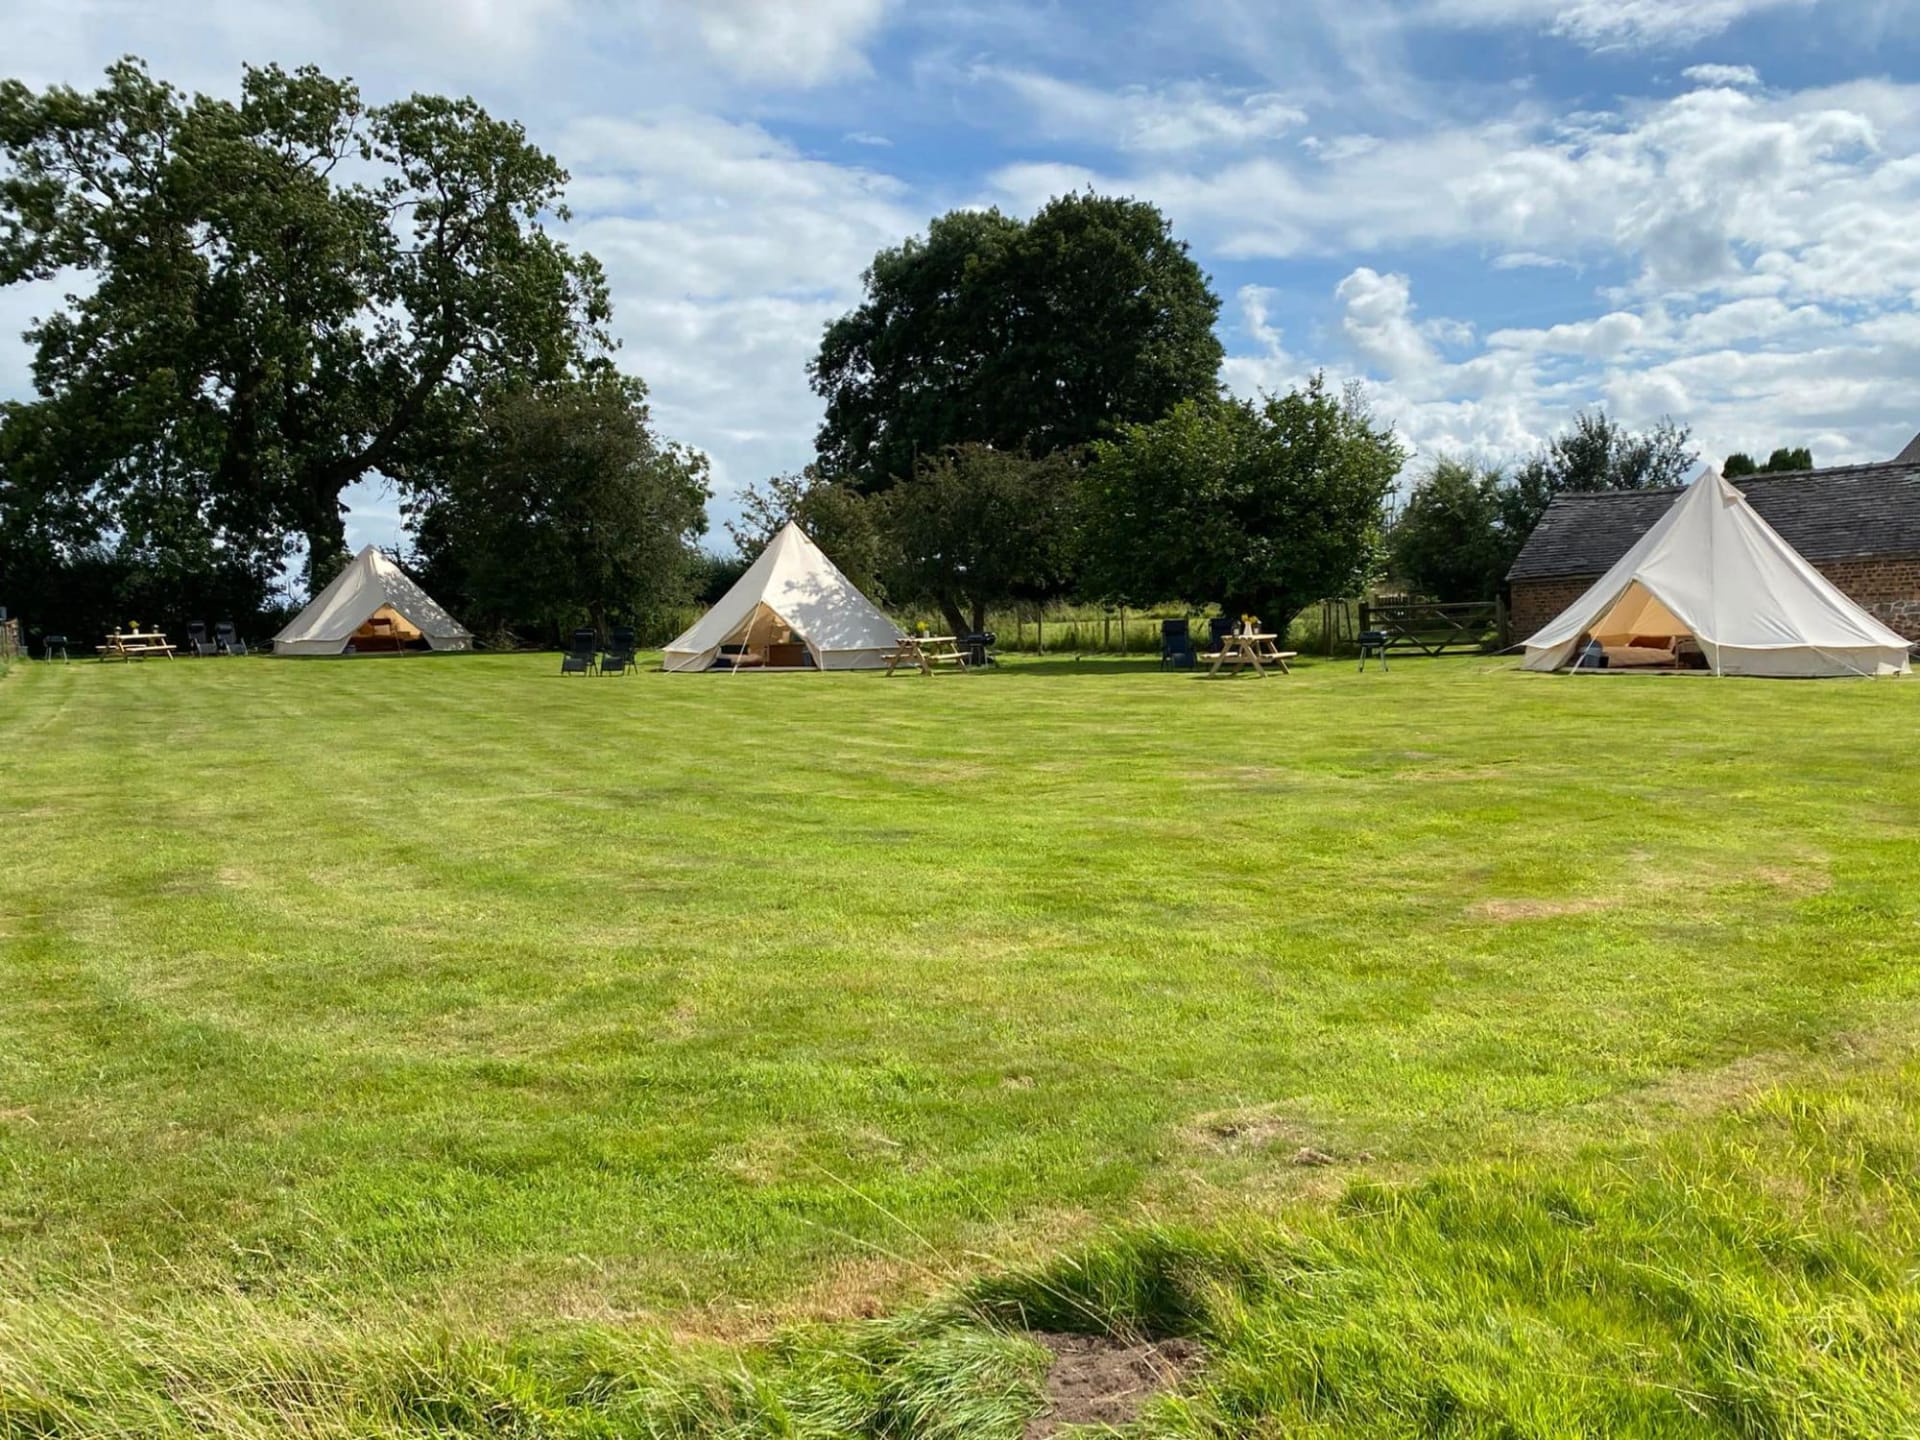 Fords Farm Glamping